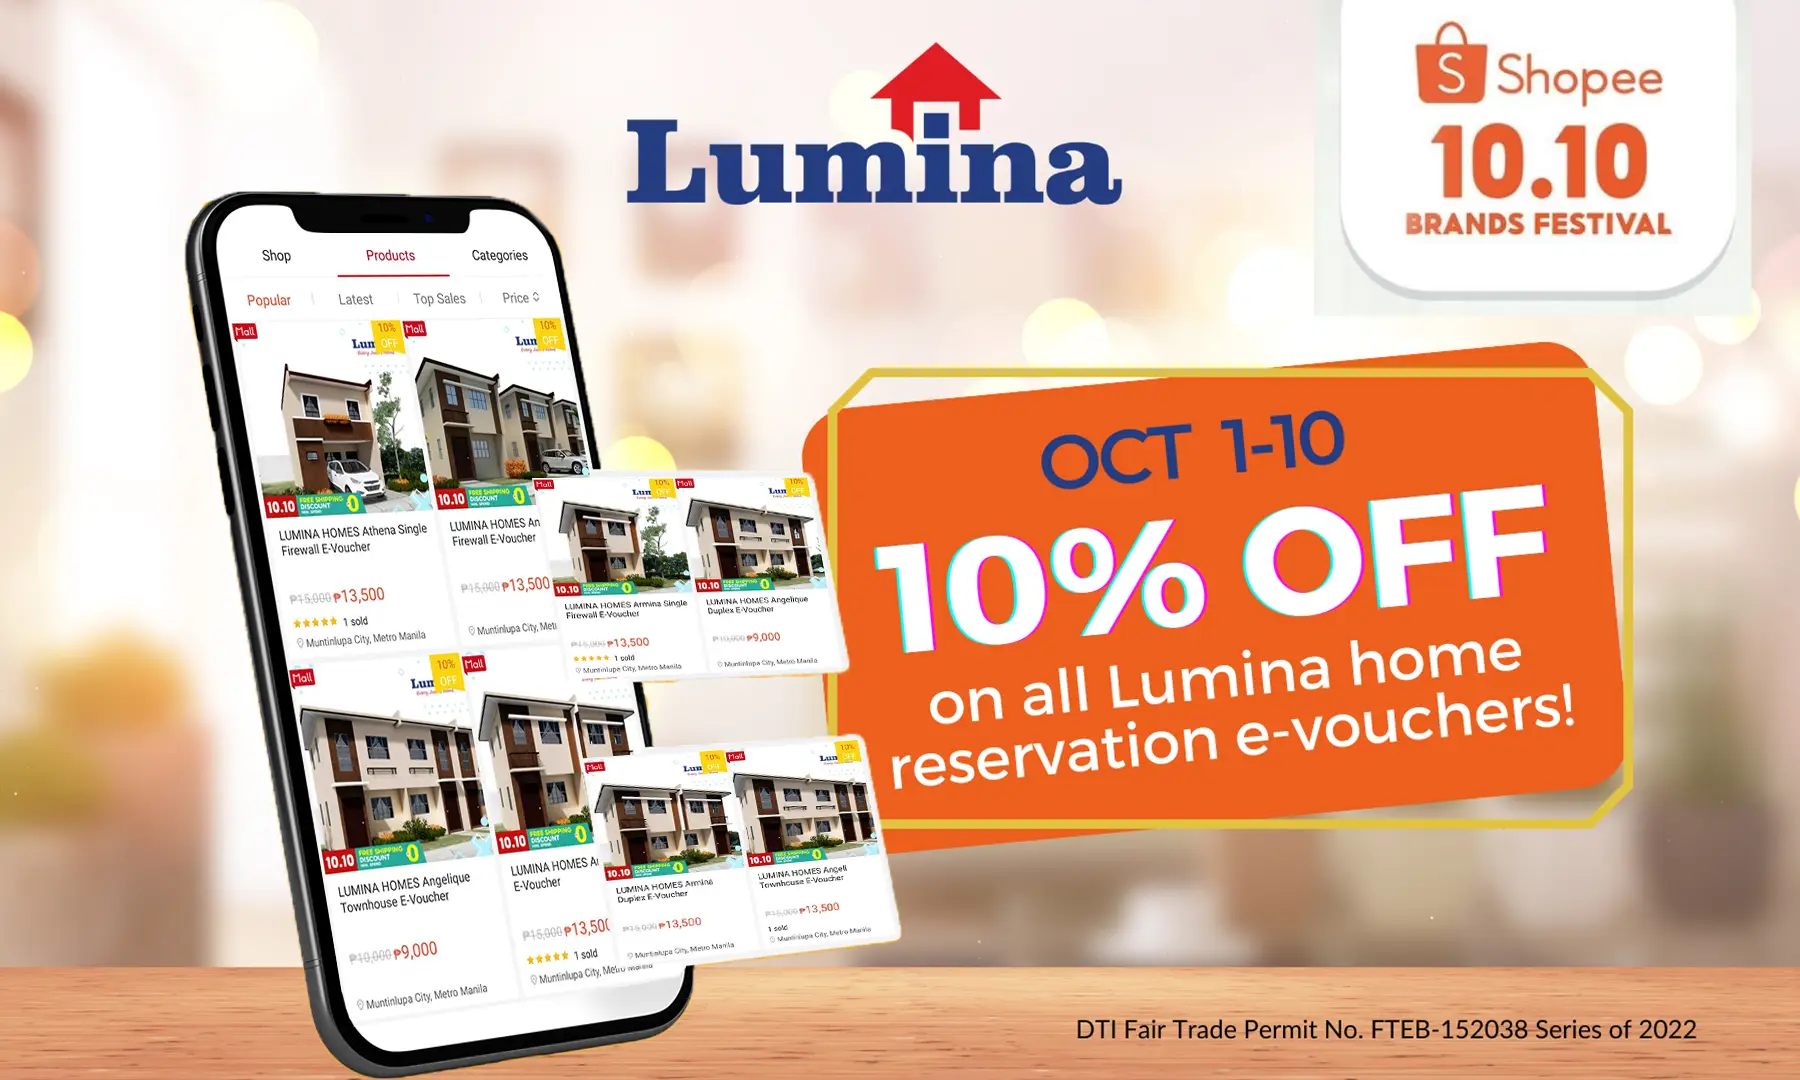 Shopee 10.10 Sale Get 10 Off on Lumina Homes Reservation Vouchers 1